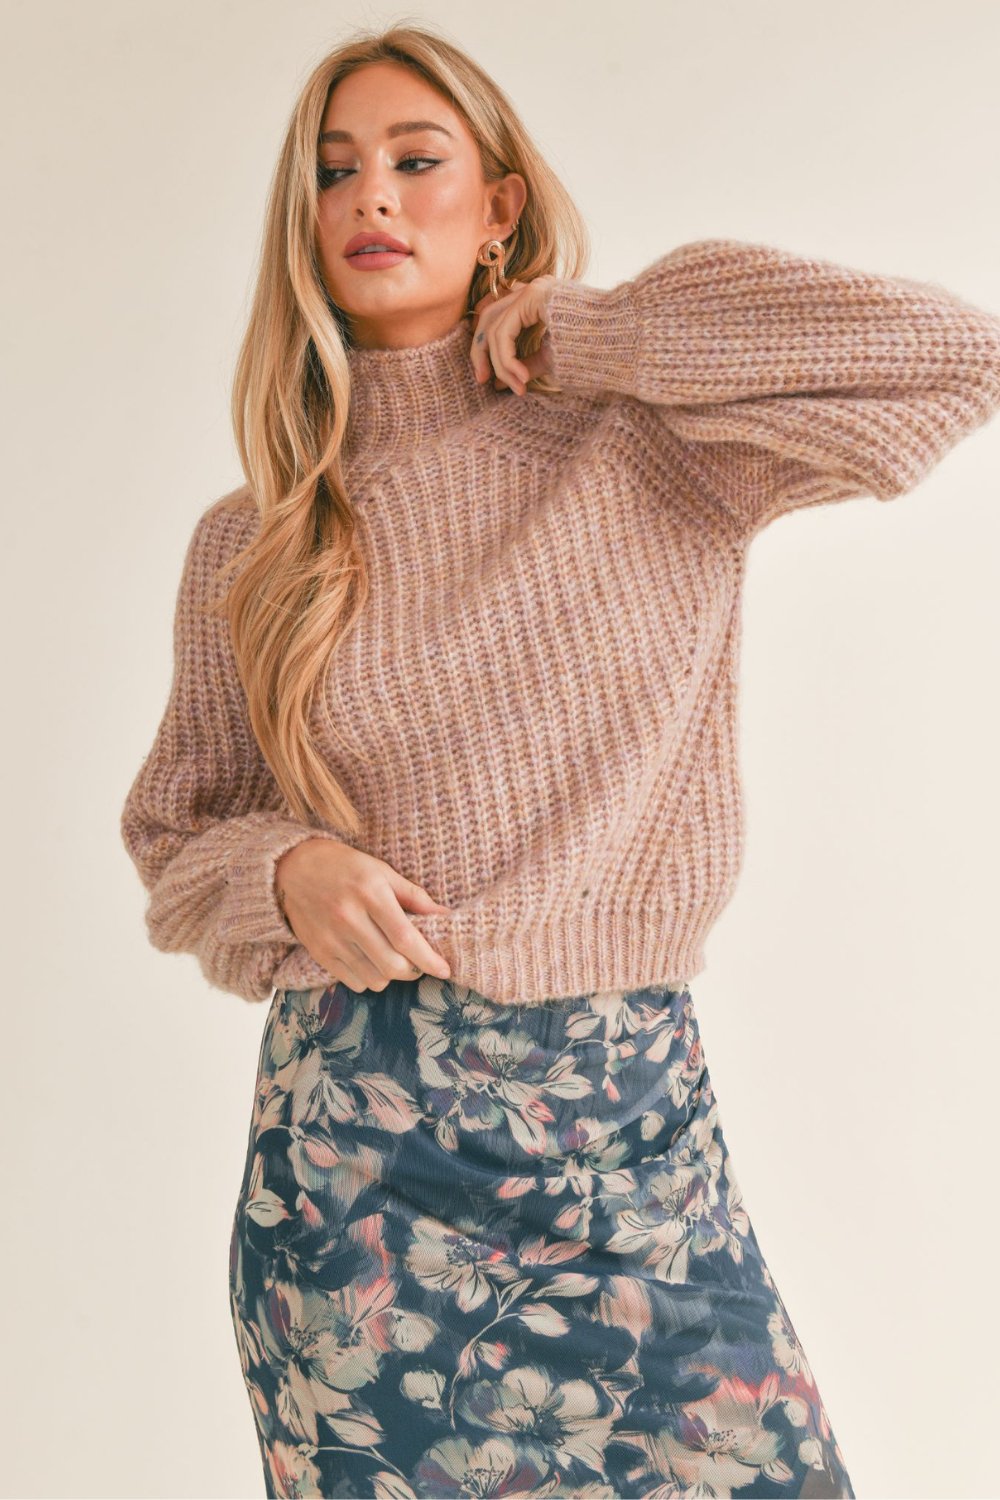 Women's Wool Blend Mock Neck Knit Sweater Top | Dusty pink - Women's Shirts & Tops - Blooming Daily